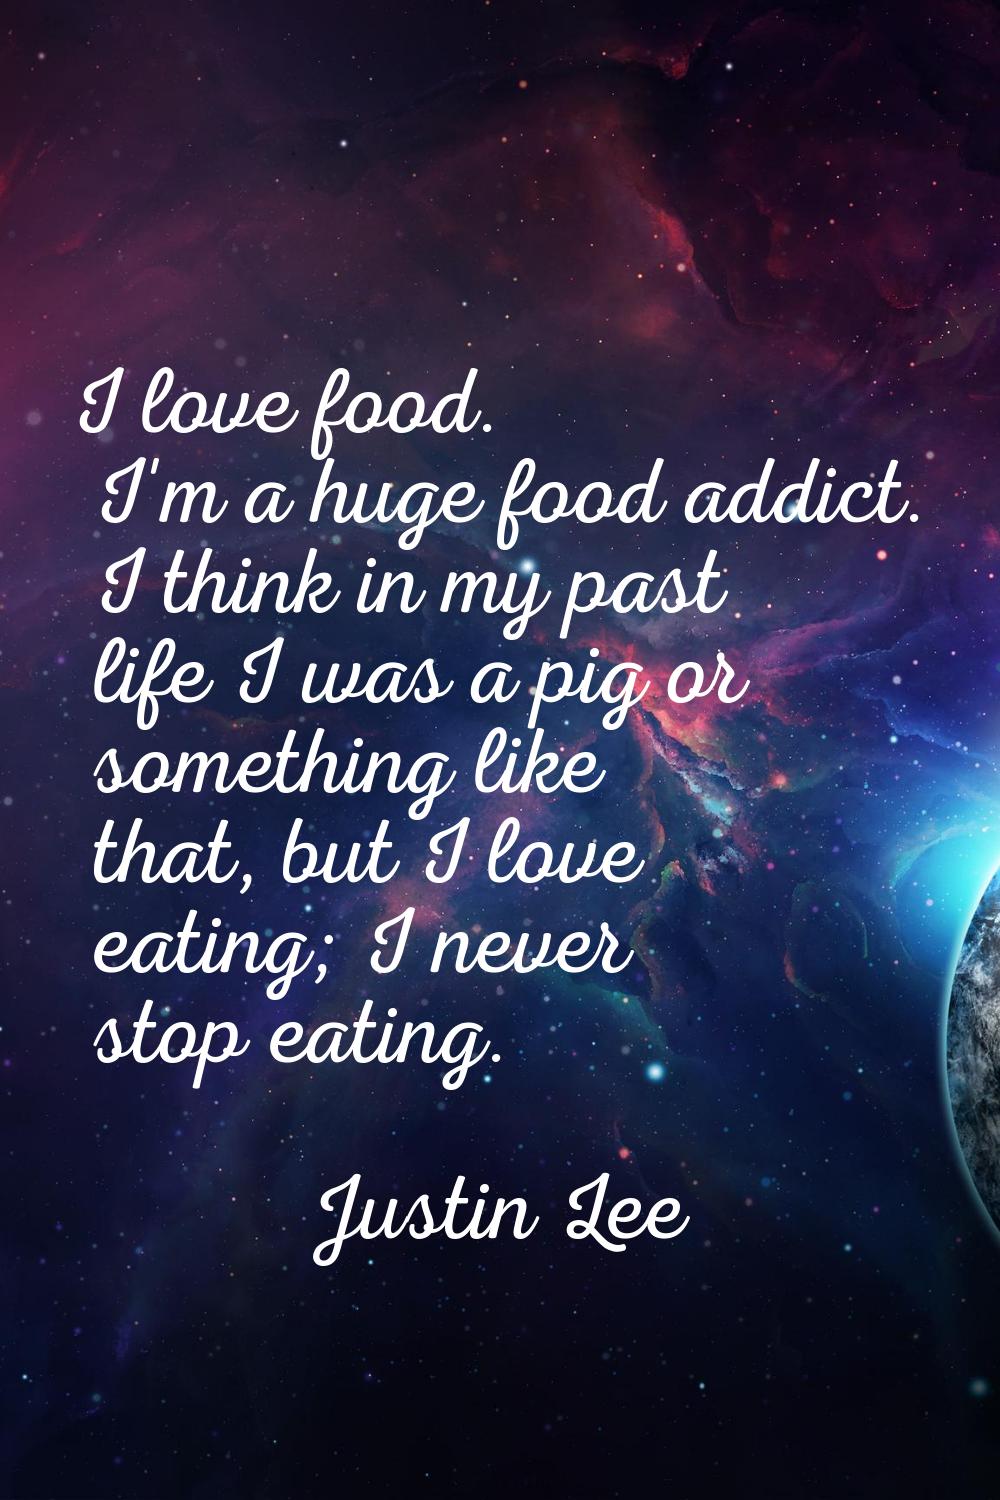 I love food. I'm a huge food addict. I think in my past life I was a pig or something like that, bu